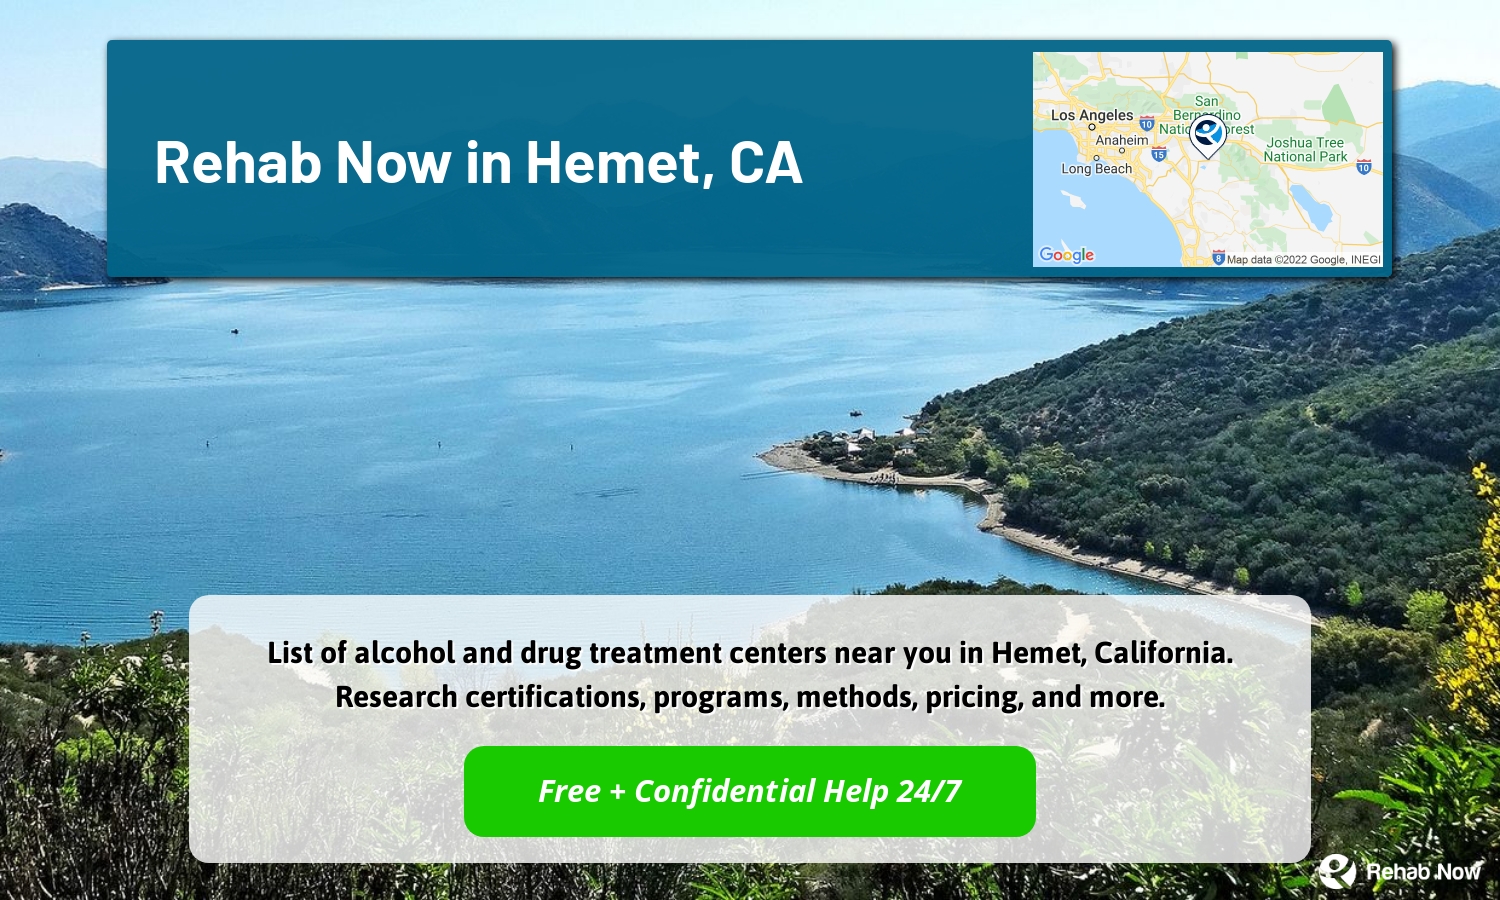 List of alcohol and drug treatment centers near you in Hemet, California. Research certifications, programs, methods, pricing, and more.